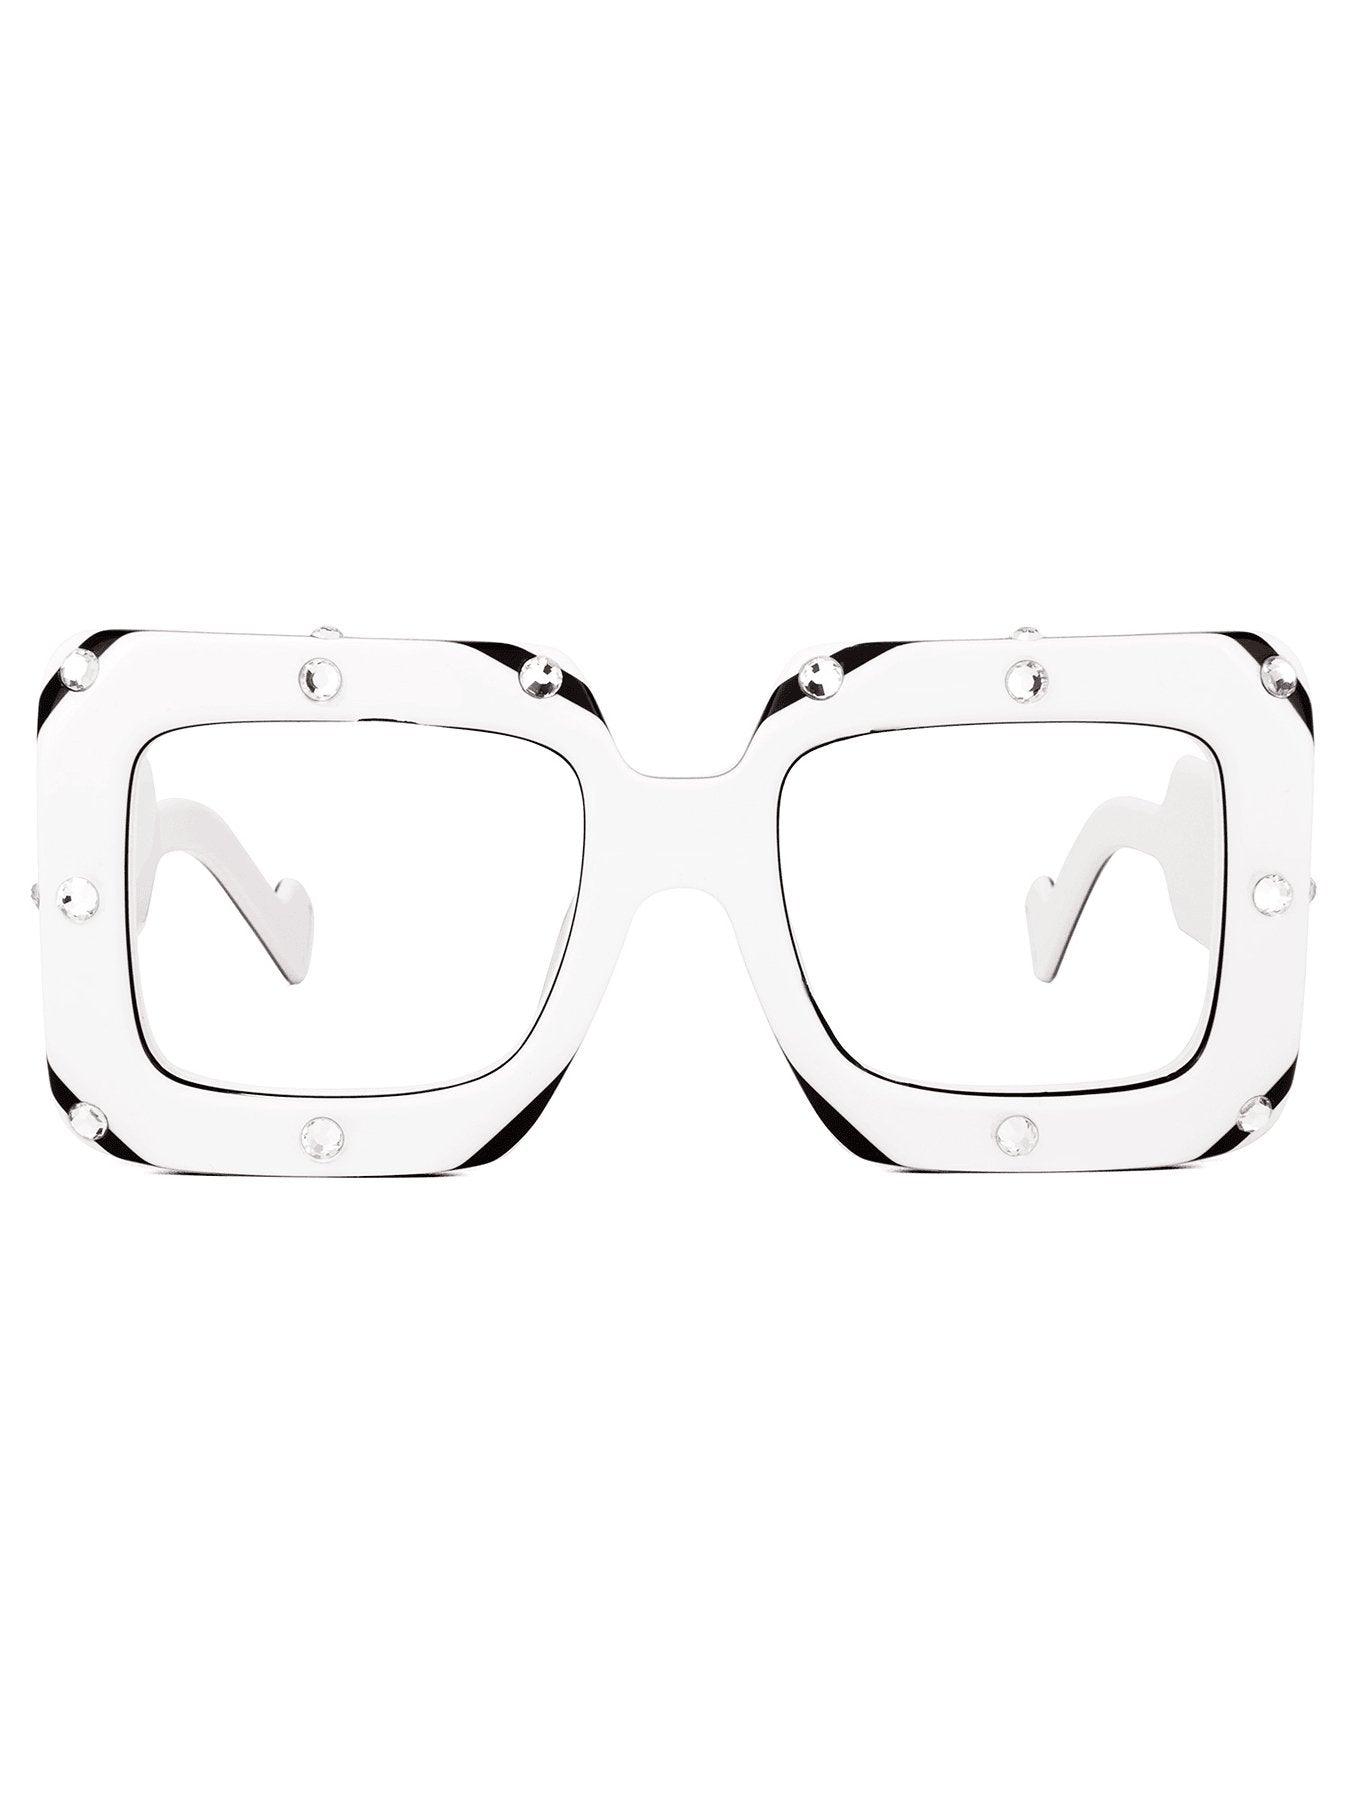 Square Eyewear Frame Perfectly Clear Style